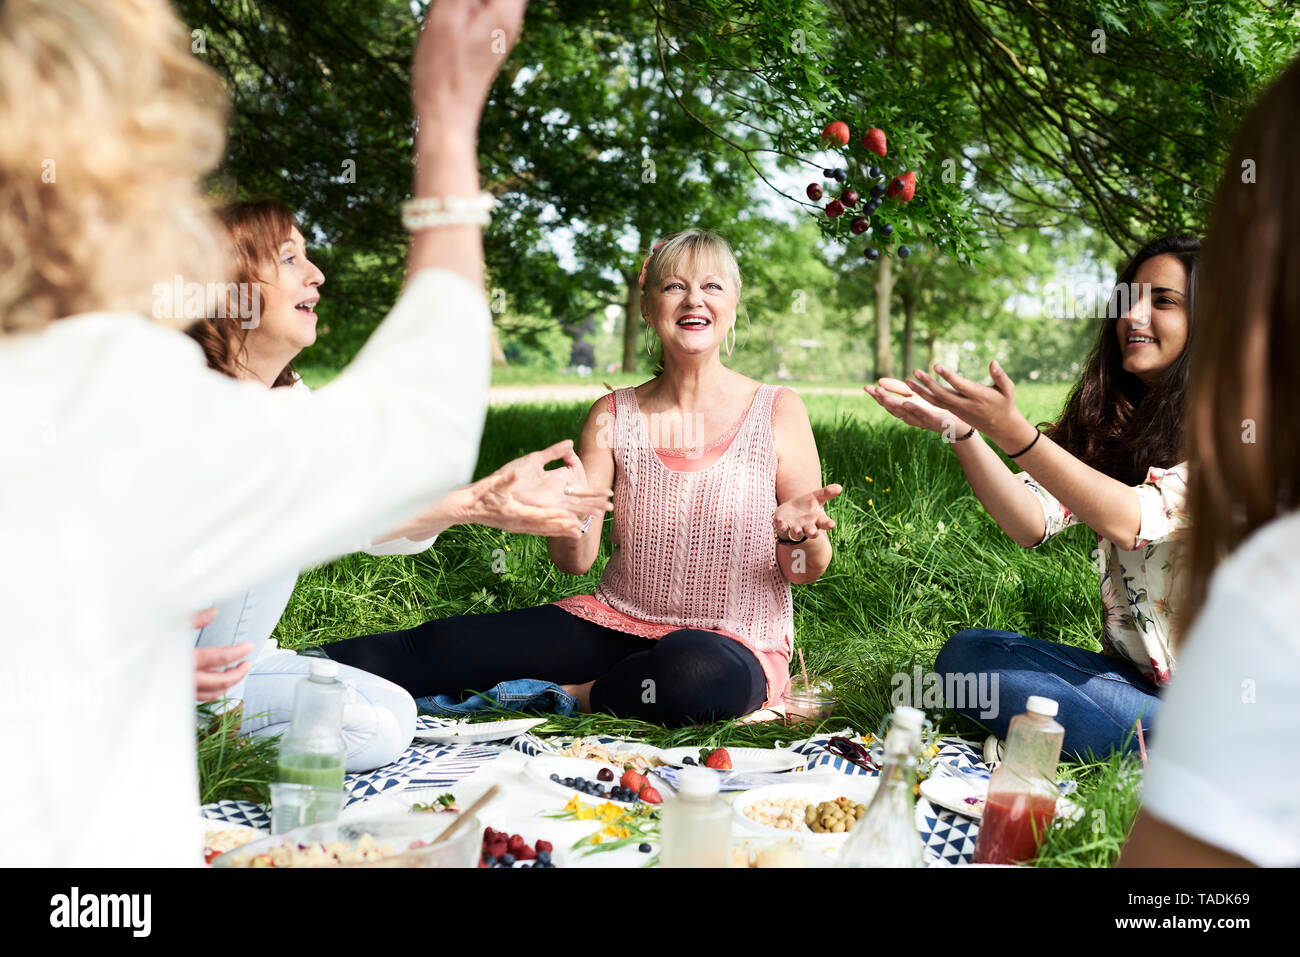 Happy women throwing berries in the air at a picnic in park Stock Photo